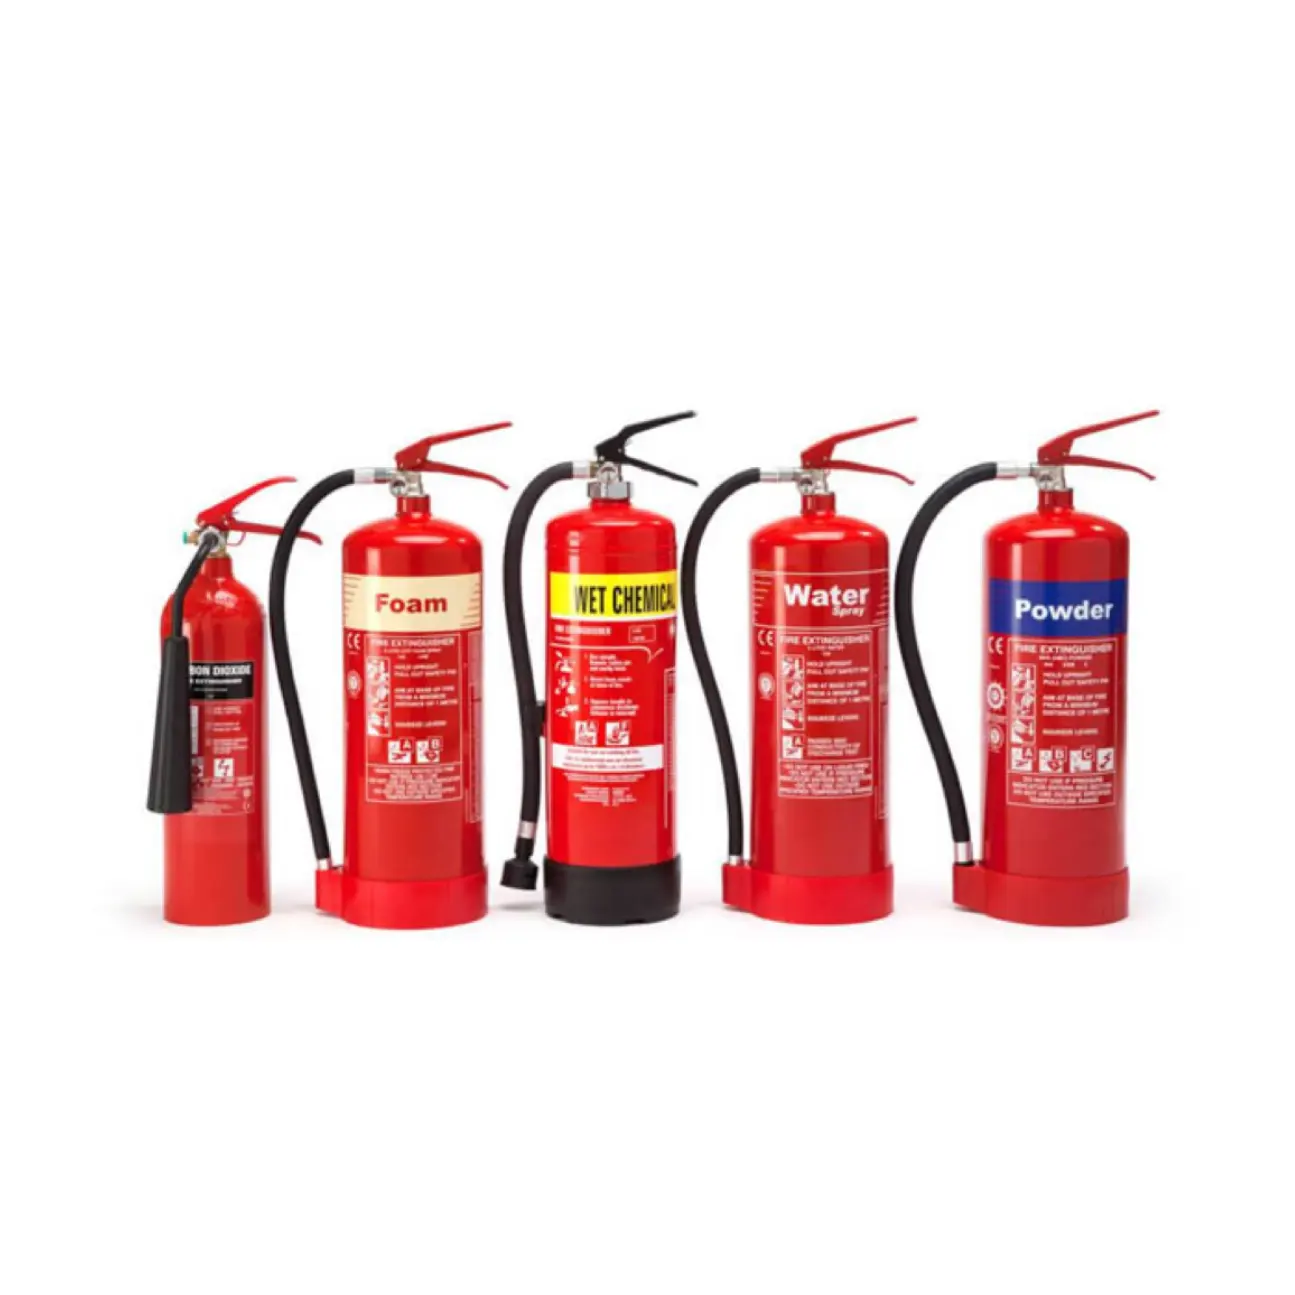 Dry Powder Extinguish 1kg ABC Dry Chemical Extinguisher for multiple purposes of fire distinguish Fire Fighting Emergency Rescue